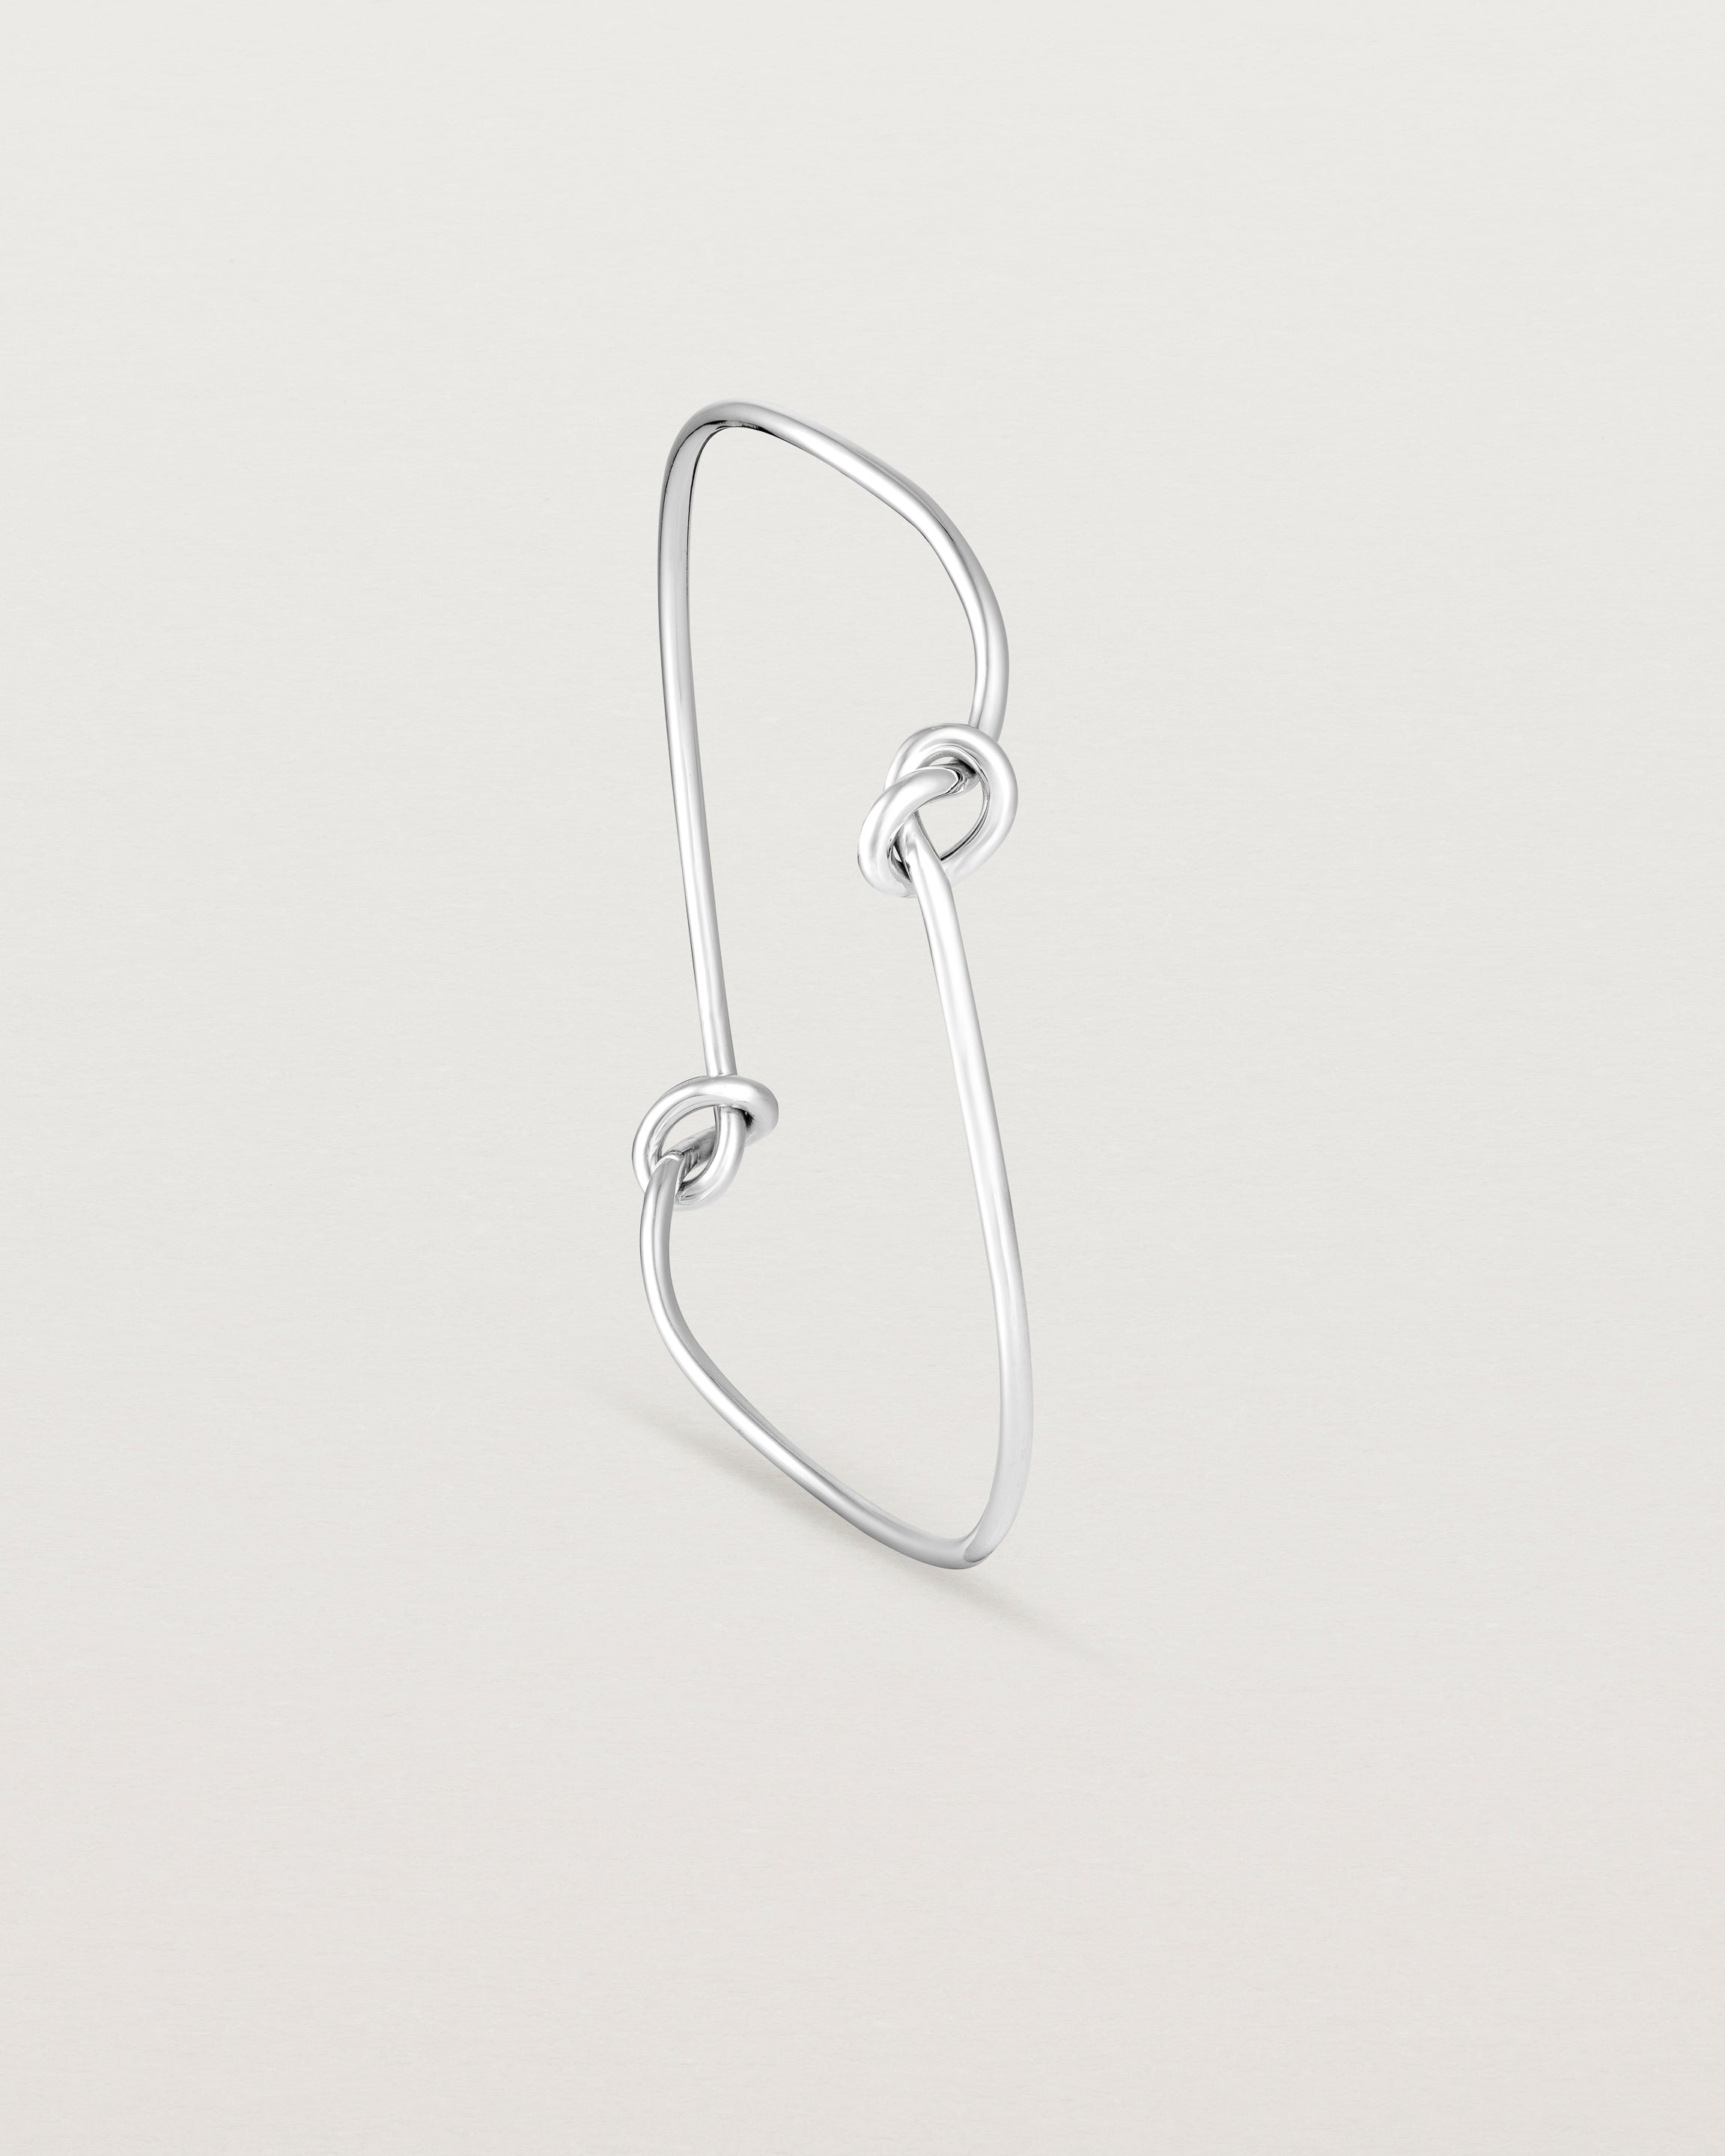 Standing view of the Dà anam Bangle in sterling silver.